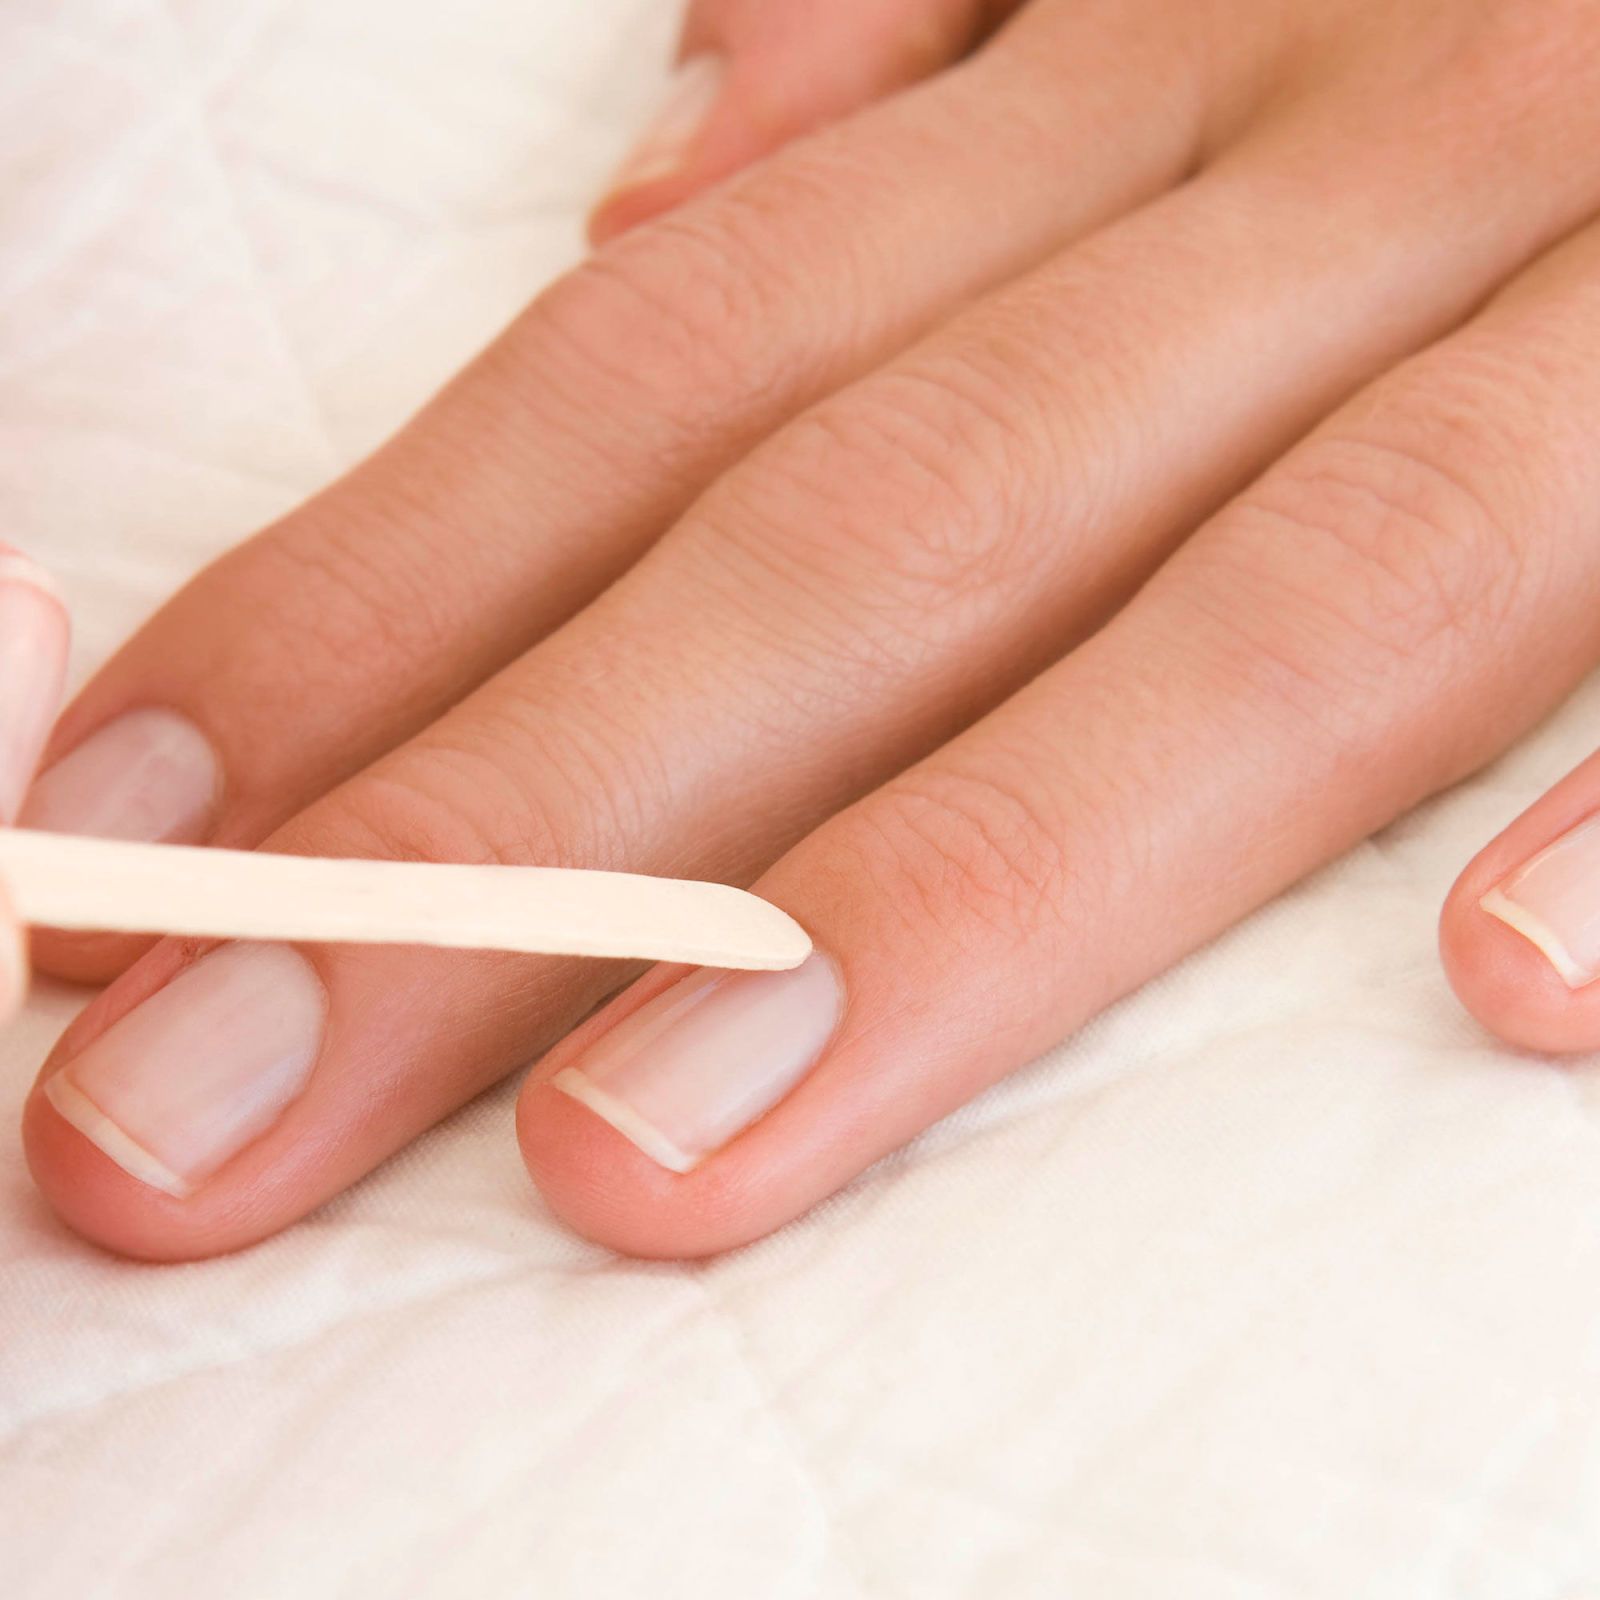 Discover What Your Nails Might Be Saying About Your Health